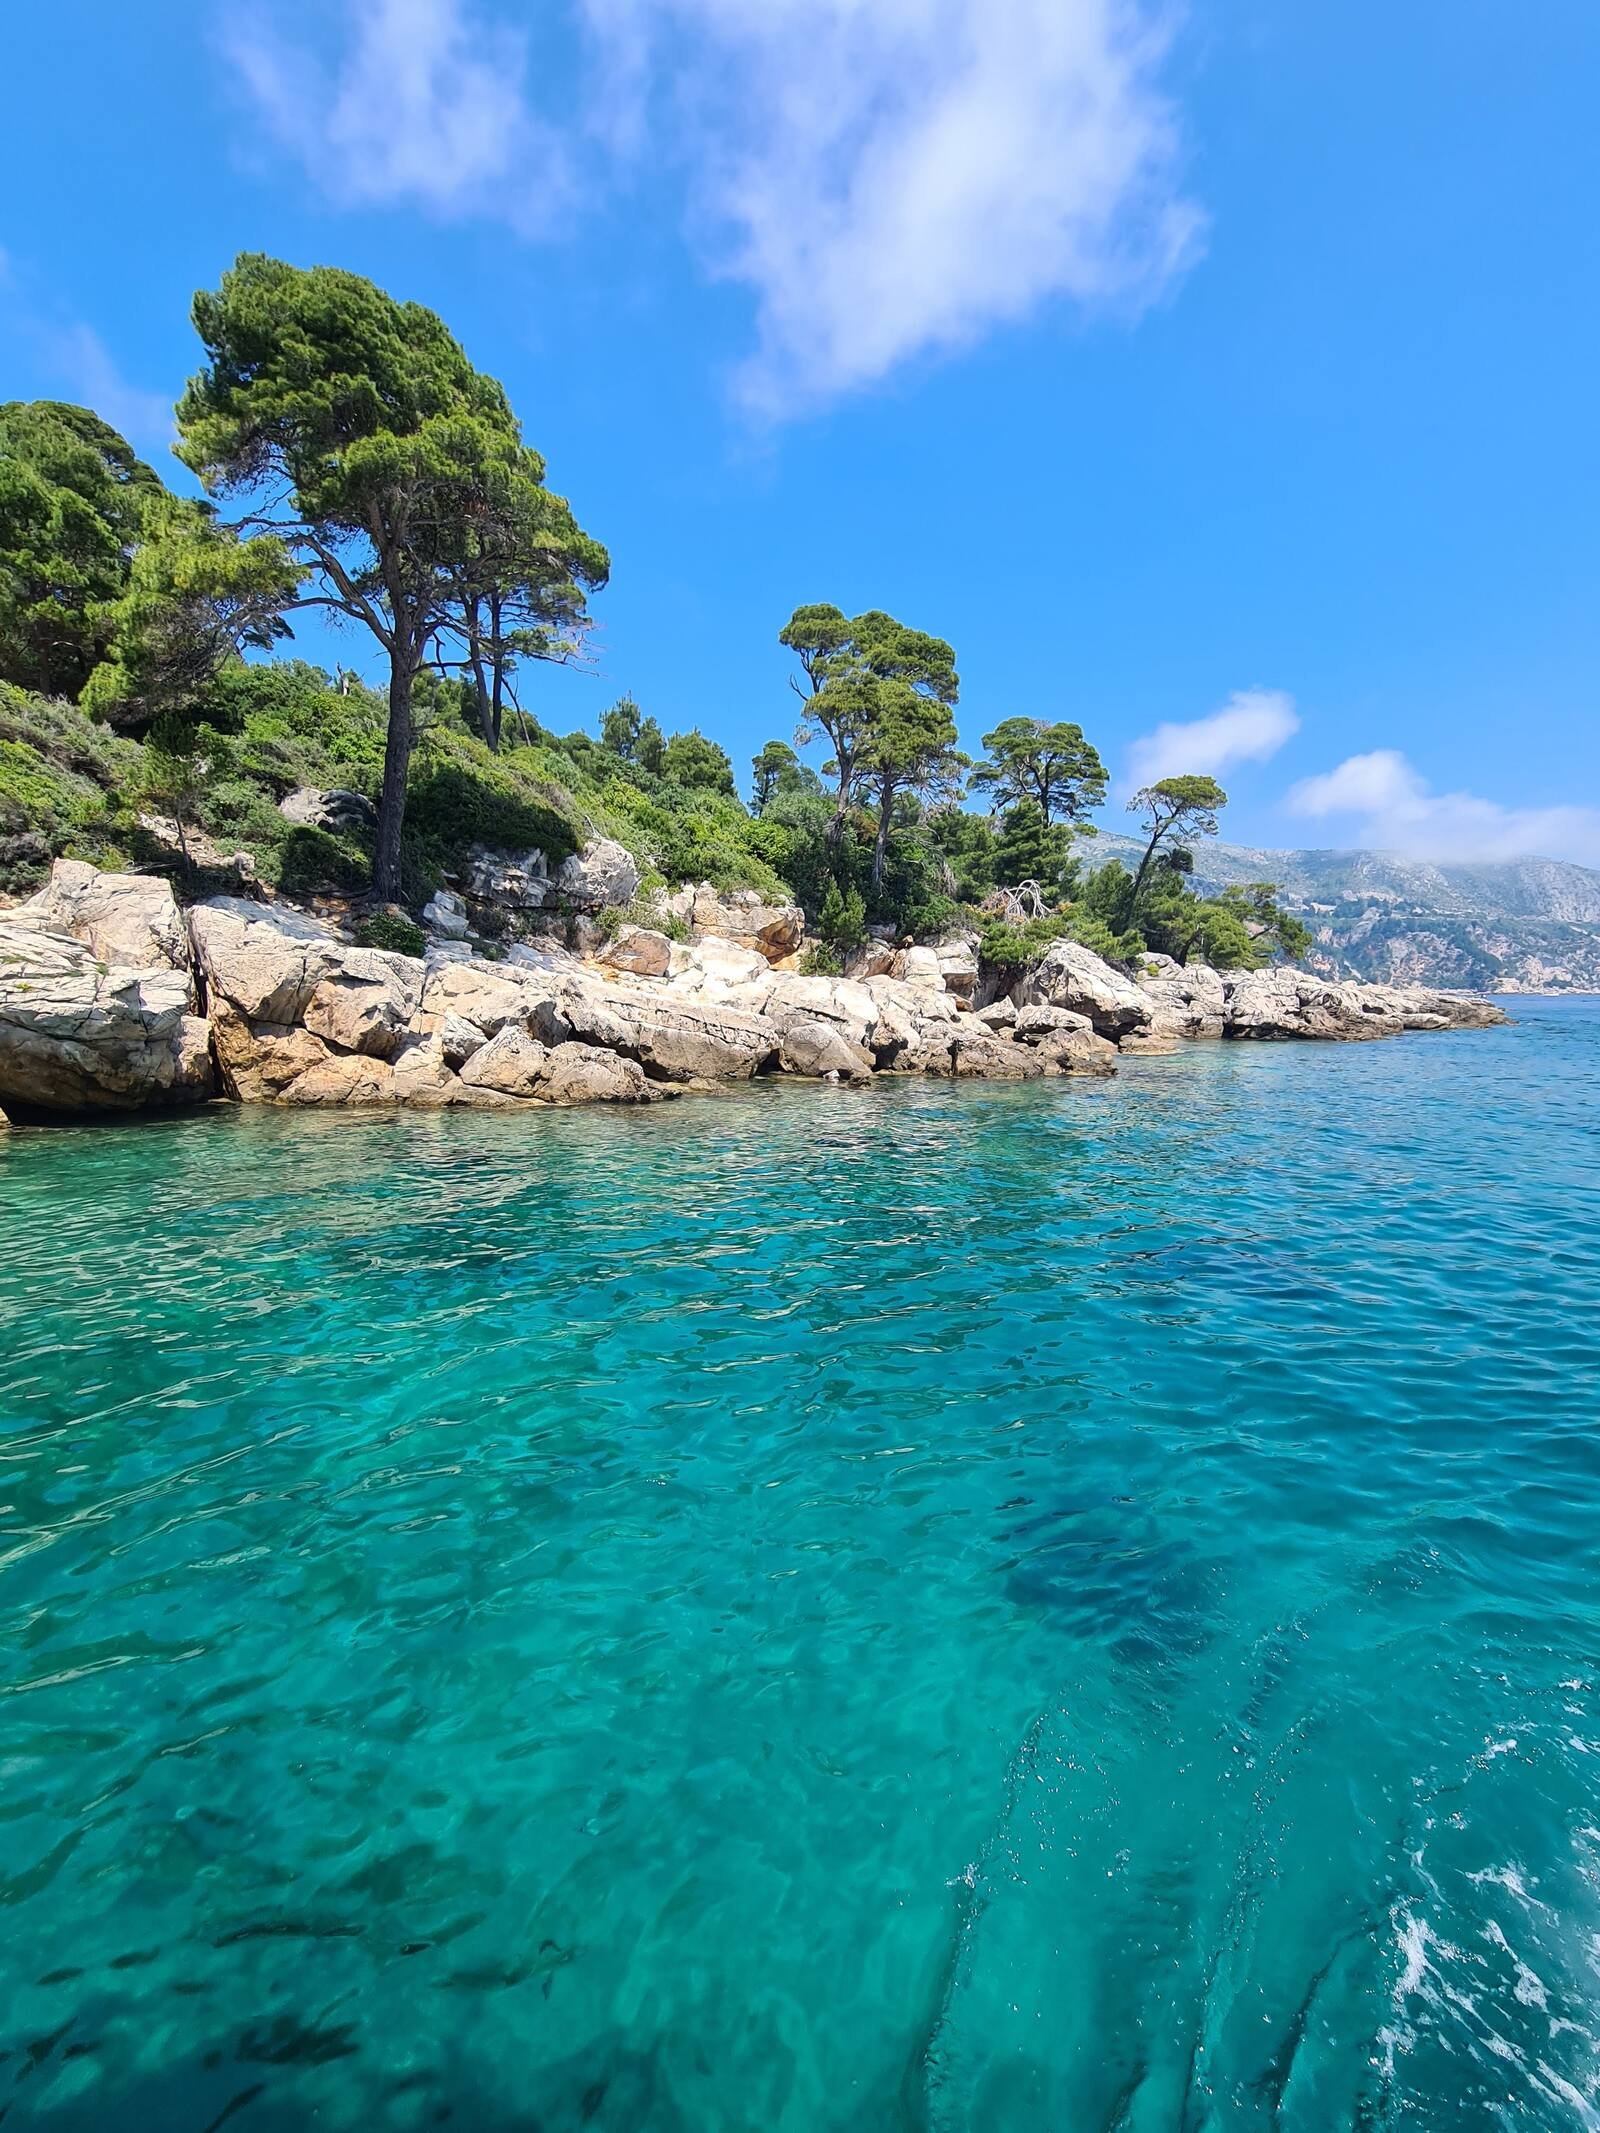 Vibrant turquoise water with rocky shores and trees in the background